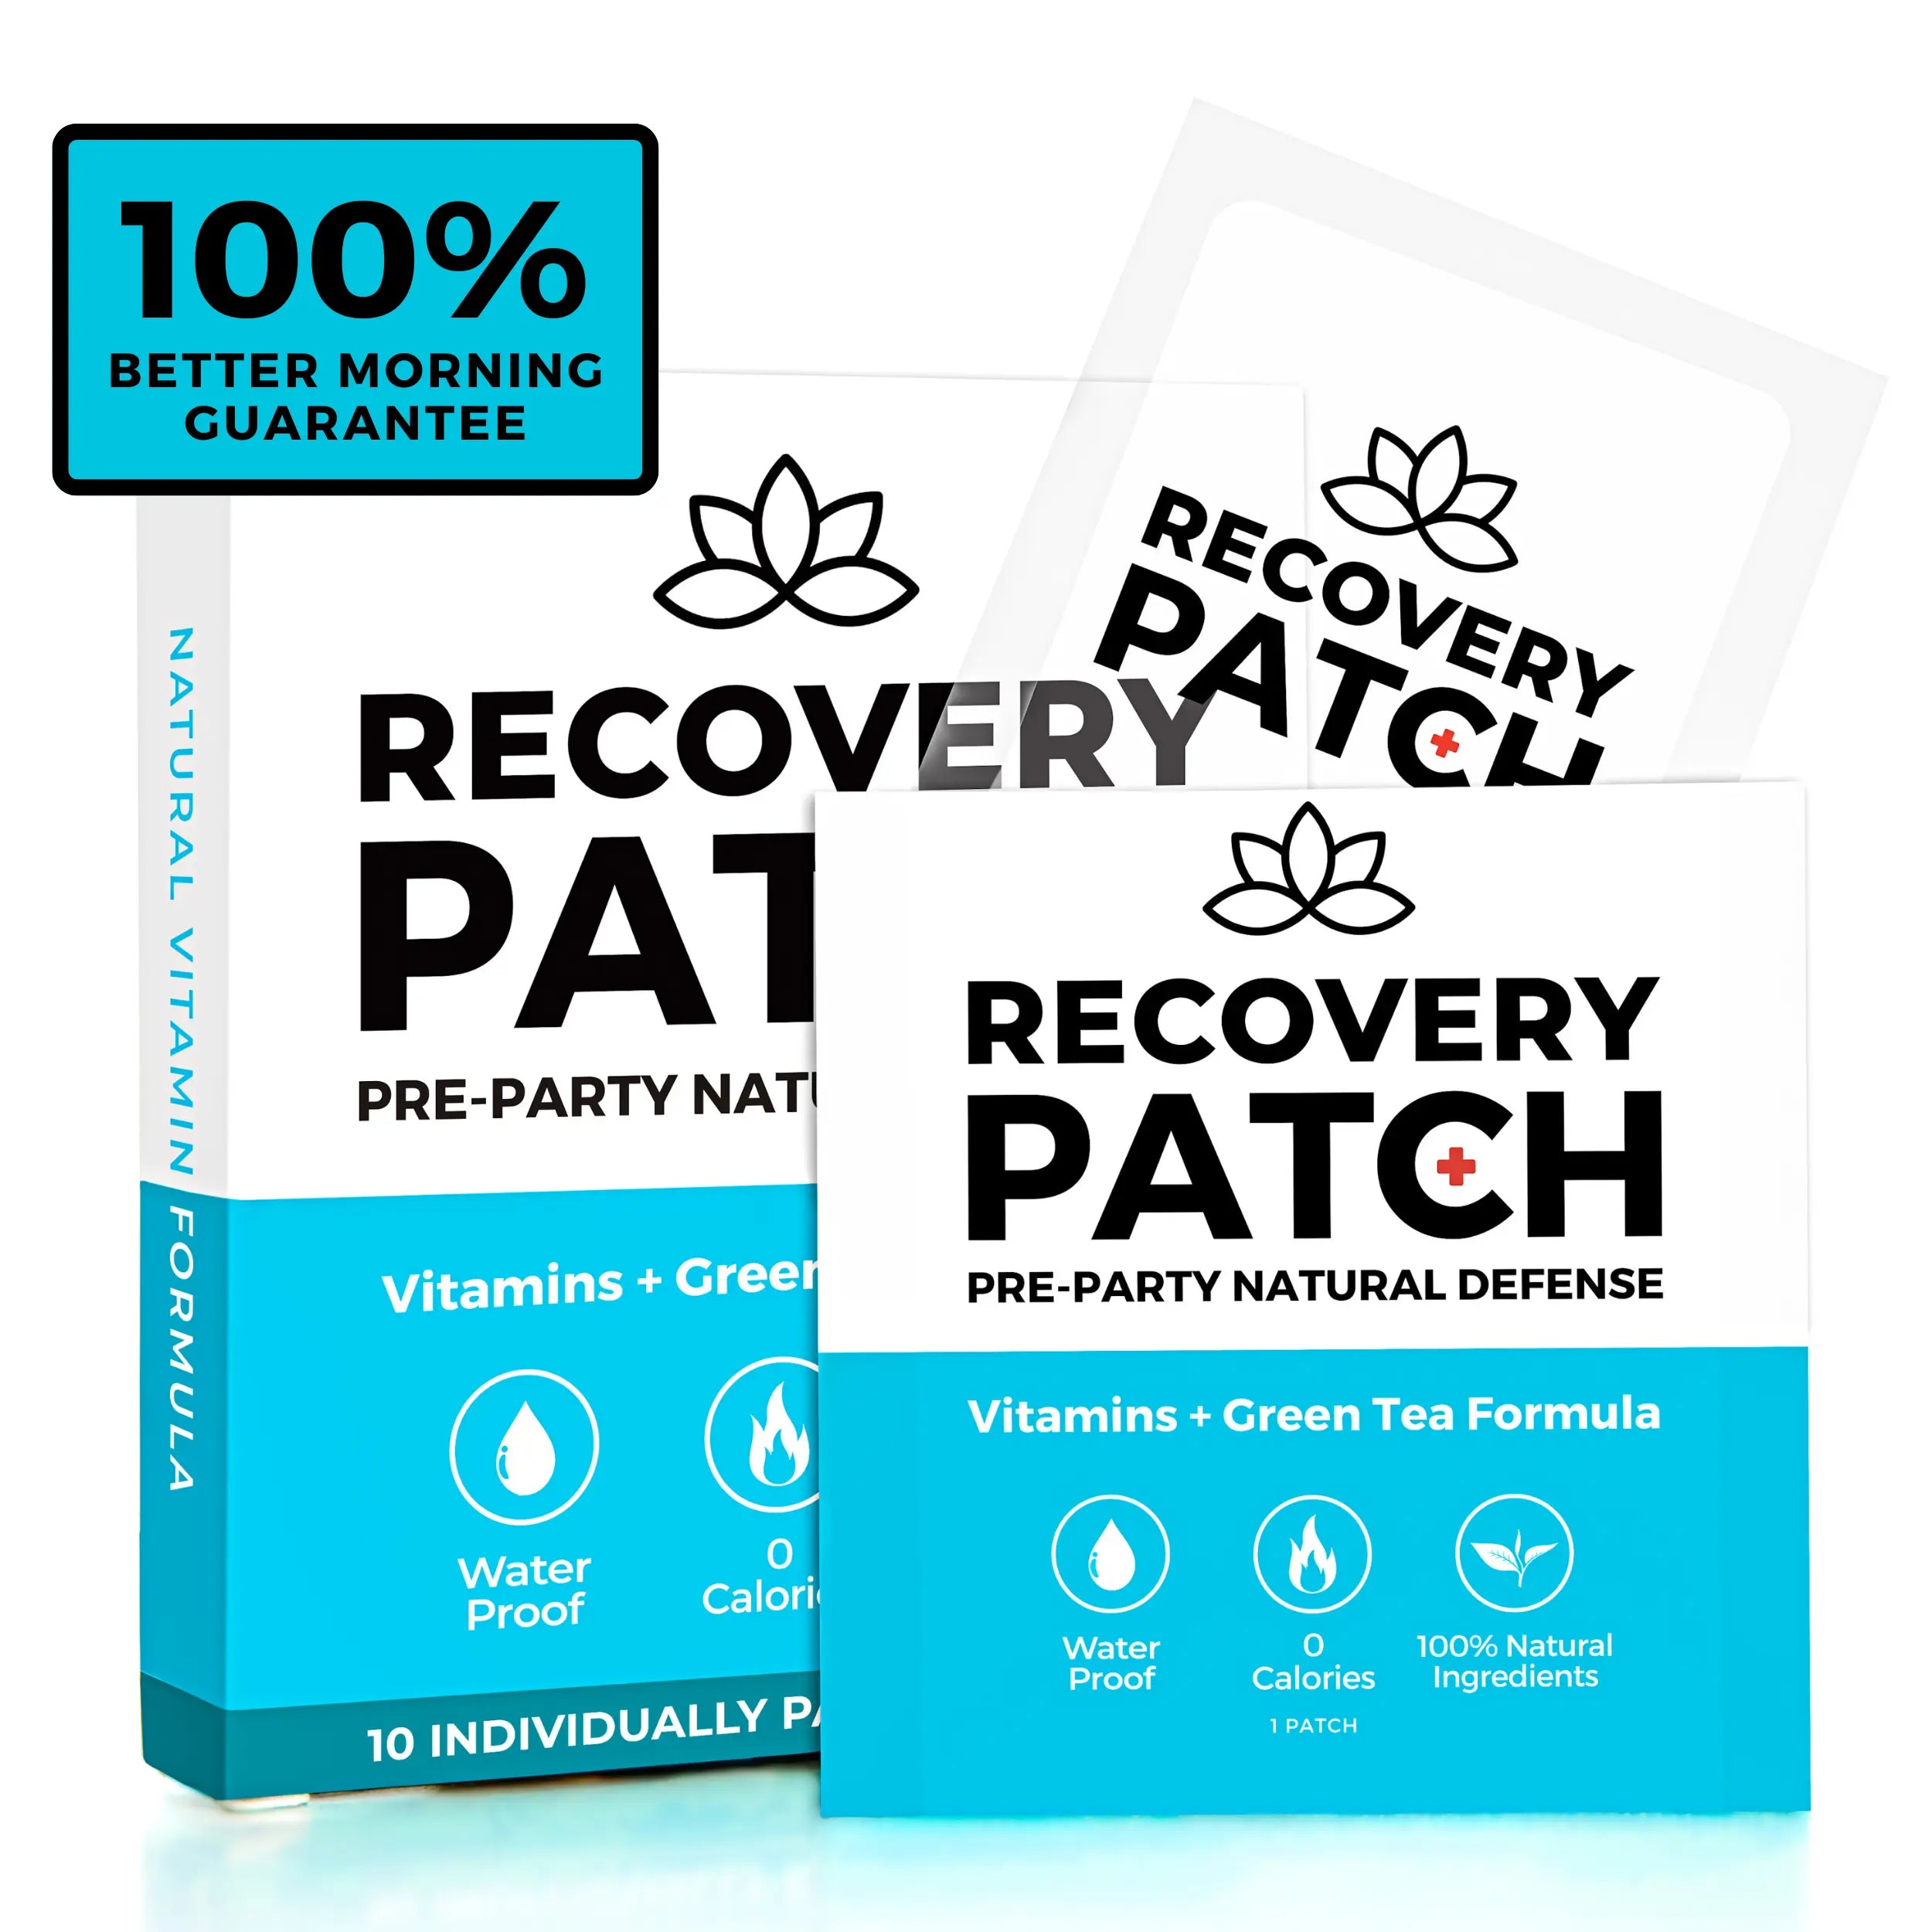 Party Treats Patches 28 Pack - Wake Up Refreshed & Energized with Our 100%  Natural Ingredients Party Patch - Skin-Friendly & Waterproof - Enhanced